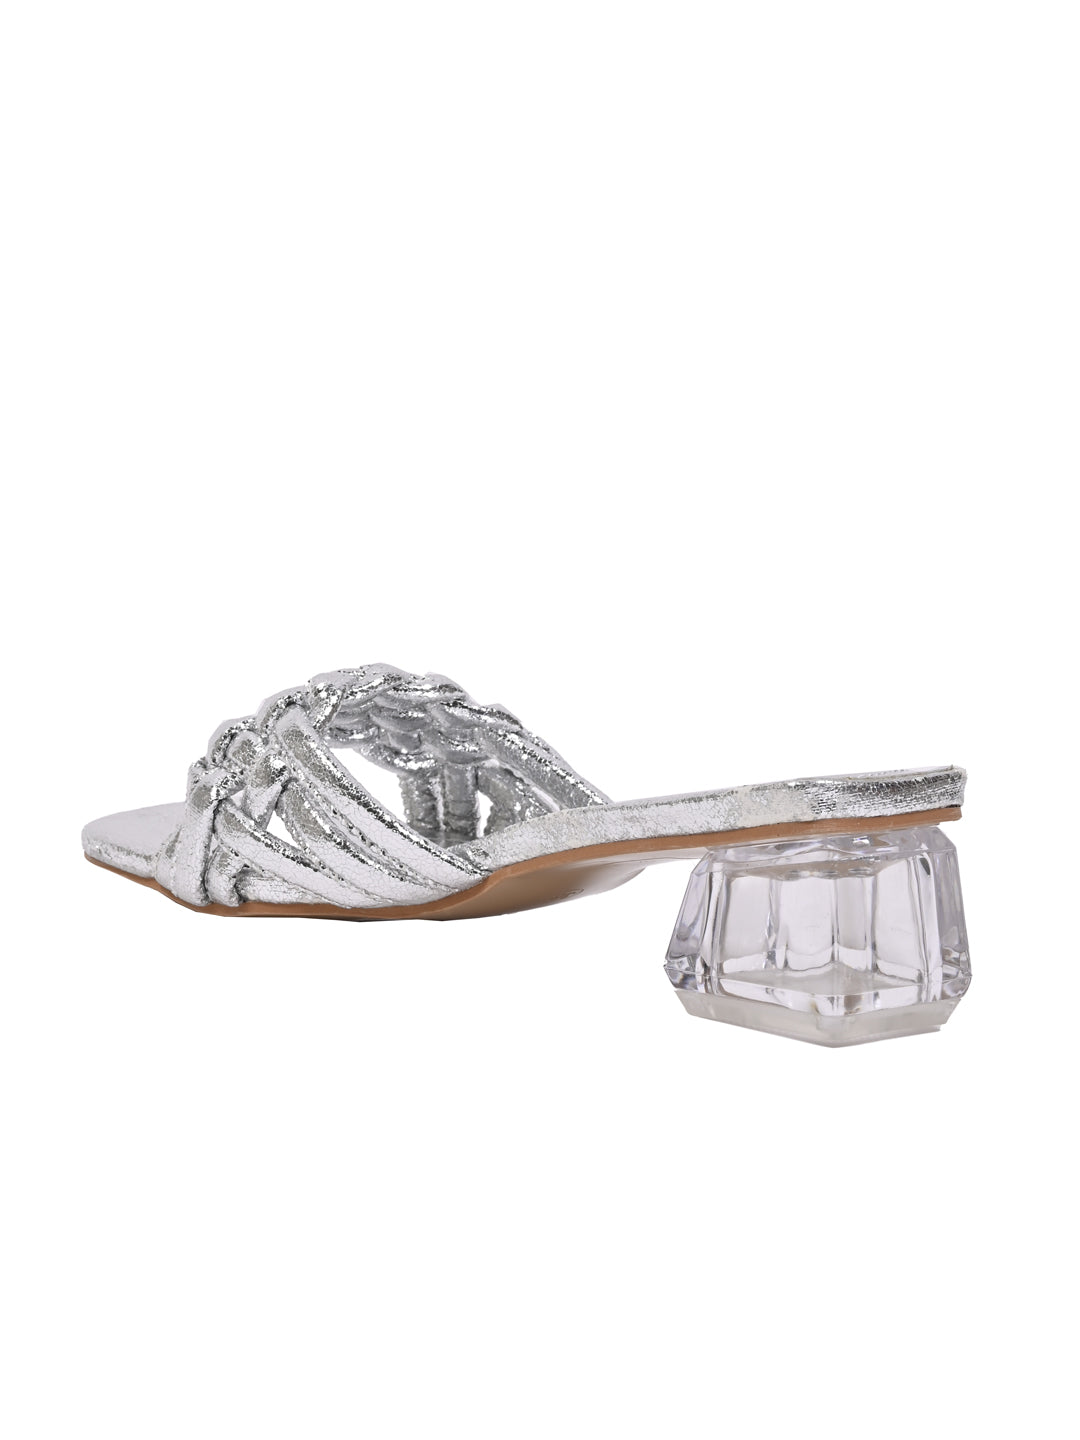 Simply Be extra wide fit diamante sandals with block heel in silver | ASOS